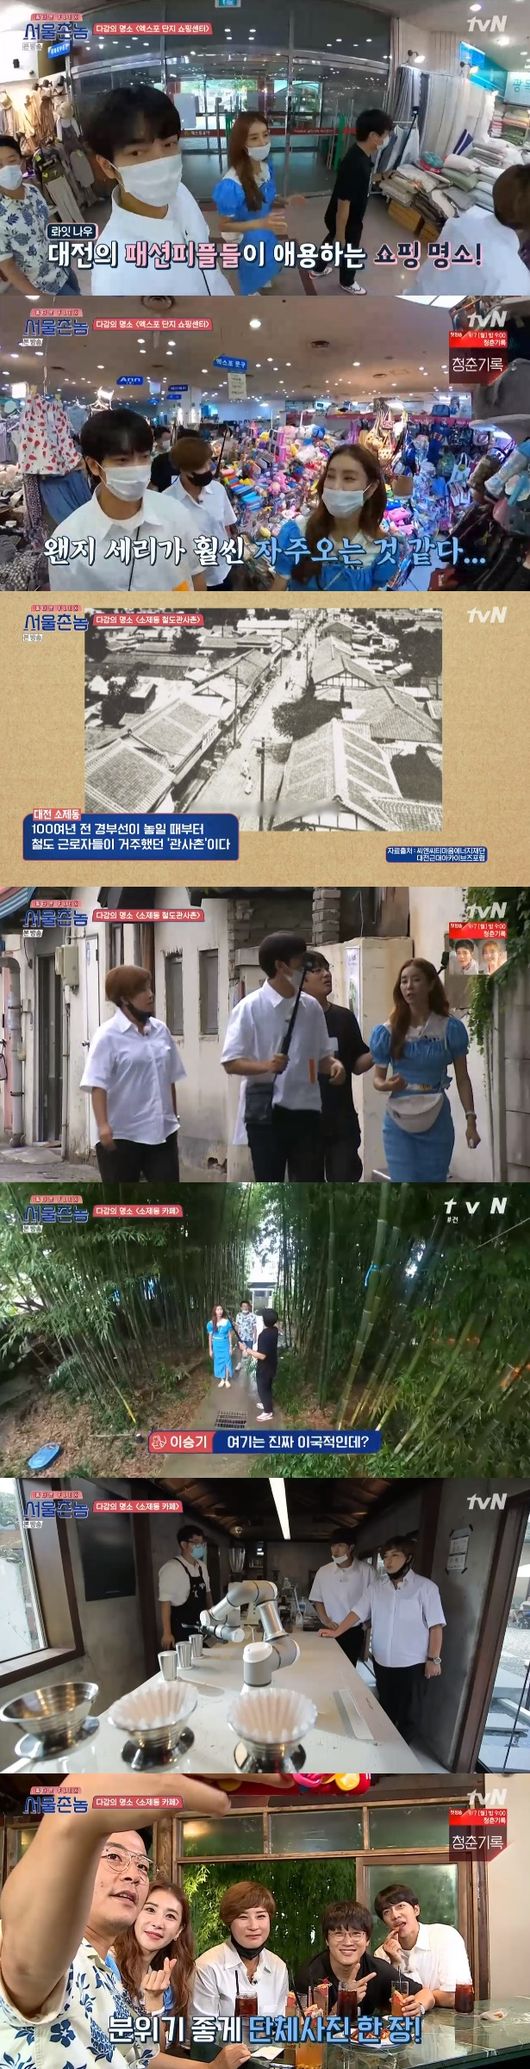 Pak Se-ri x Han Eun-jung x Kim Jun-ho revealed the Festival vice.In the TVN entertainment Hometown Flex  broadcasted on the 23rd, the figure of Pak Se-ri x Han Eun-jung x Kim Jun-ho was drawn to find the hidden attraction of Festival.On this day, Pak Se-ri x Kim Jun-ho x Han Eun-jung appeared as a festival local.Lee Seung-gi told the three people, I was wondering where my acquaintance would go because I was going to Festival.The production team also said, Festival: Nojam is in the search term. Cha Tae-hyun said, Really?Kim Jun-ho said, No jam, it is not good if you think it is bad ... it is okay if you think it is a sunbee image.After that, I headed to the recreational restaurant recommended by Pak Se-ri, and five people played games, and Seoul team Lee Seung-gi x Cha Tae-hyun won and tasted chicken and duck meat recommended by Pak Se-ri.After eating, I headed to the Expo Complex Shopping Center recommended by Han Eun-jung.When you come here, you can see the trend, Han Eun-jung said, while Pak Se-ri said, this place is cheap, too, there are import corners.When the second floor clothing store arrived, Pak Se-ri said, Heres my regular house, where my sister is really going well. The boss welcomed Pak Se-ri.After watching the clothes, I went up to the fourth floor, there was a fan signing ceremony, and Lee Seung-gi, who received the most love from the festival citizens, won the final victory and got the desired tissue case.Then, headed to Soje-dong, a landmark recommended by Han Eun-jung, who admired Lee Seung-gi and Cha Tae-hyunun, saying, Wow and this is different, young people will like it.Han Eun-jung said, Festival is not funny. Festival is hiding. He arrived at the Soje-dong railway officers cousin and looked around and explained, It has been over 100 years since it was established.Then I went into the candid cafe: Pak Se-ri was proud to say, Festival has fun to visit like this, and Lee Seung-gi said, Its quite exotic.Its really amazing, he said.Asked how the Festival tour was so far, Lee Seung-gi said, Its not no jam, its like its up to middle jam. Cha Tae-hyunun said, I like it here so much.Meanwhile, on the day, Pak Se-ri x Han Eun-jung x Kim Jun-ho met a mechanic and listened to Sajupul: My luck changed when I came in at 46.For the future, luck will be cut off from IC shit and go all the way: it fits well with San E Instead, you just have to do things that are deviating from words and phrases, legal, moral and ethical.Kim Jun-ho said, I like water, and the introvert replied, I can not be bad. Kim Jun-ho said, I moved to a place where water was seen a while ago.I can not be lucky. Then the introvert advised, Do the interior with the tree.Then I saw the Pak Se-ri Saju: Its a mountain, its a stone San E Mans a tree. Fortune to meet each other. Ive been lucky for 25 years.Lee Seung-gi was surprised to say, Is it still a great luck? To Han Eun-jung, Its a sure entertainer buy. Take the baby quickly.Im going to have a son like Lee Seung-gi, he explained.broadcast screen capture